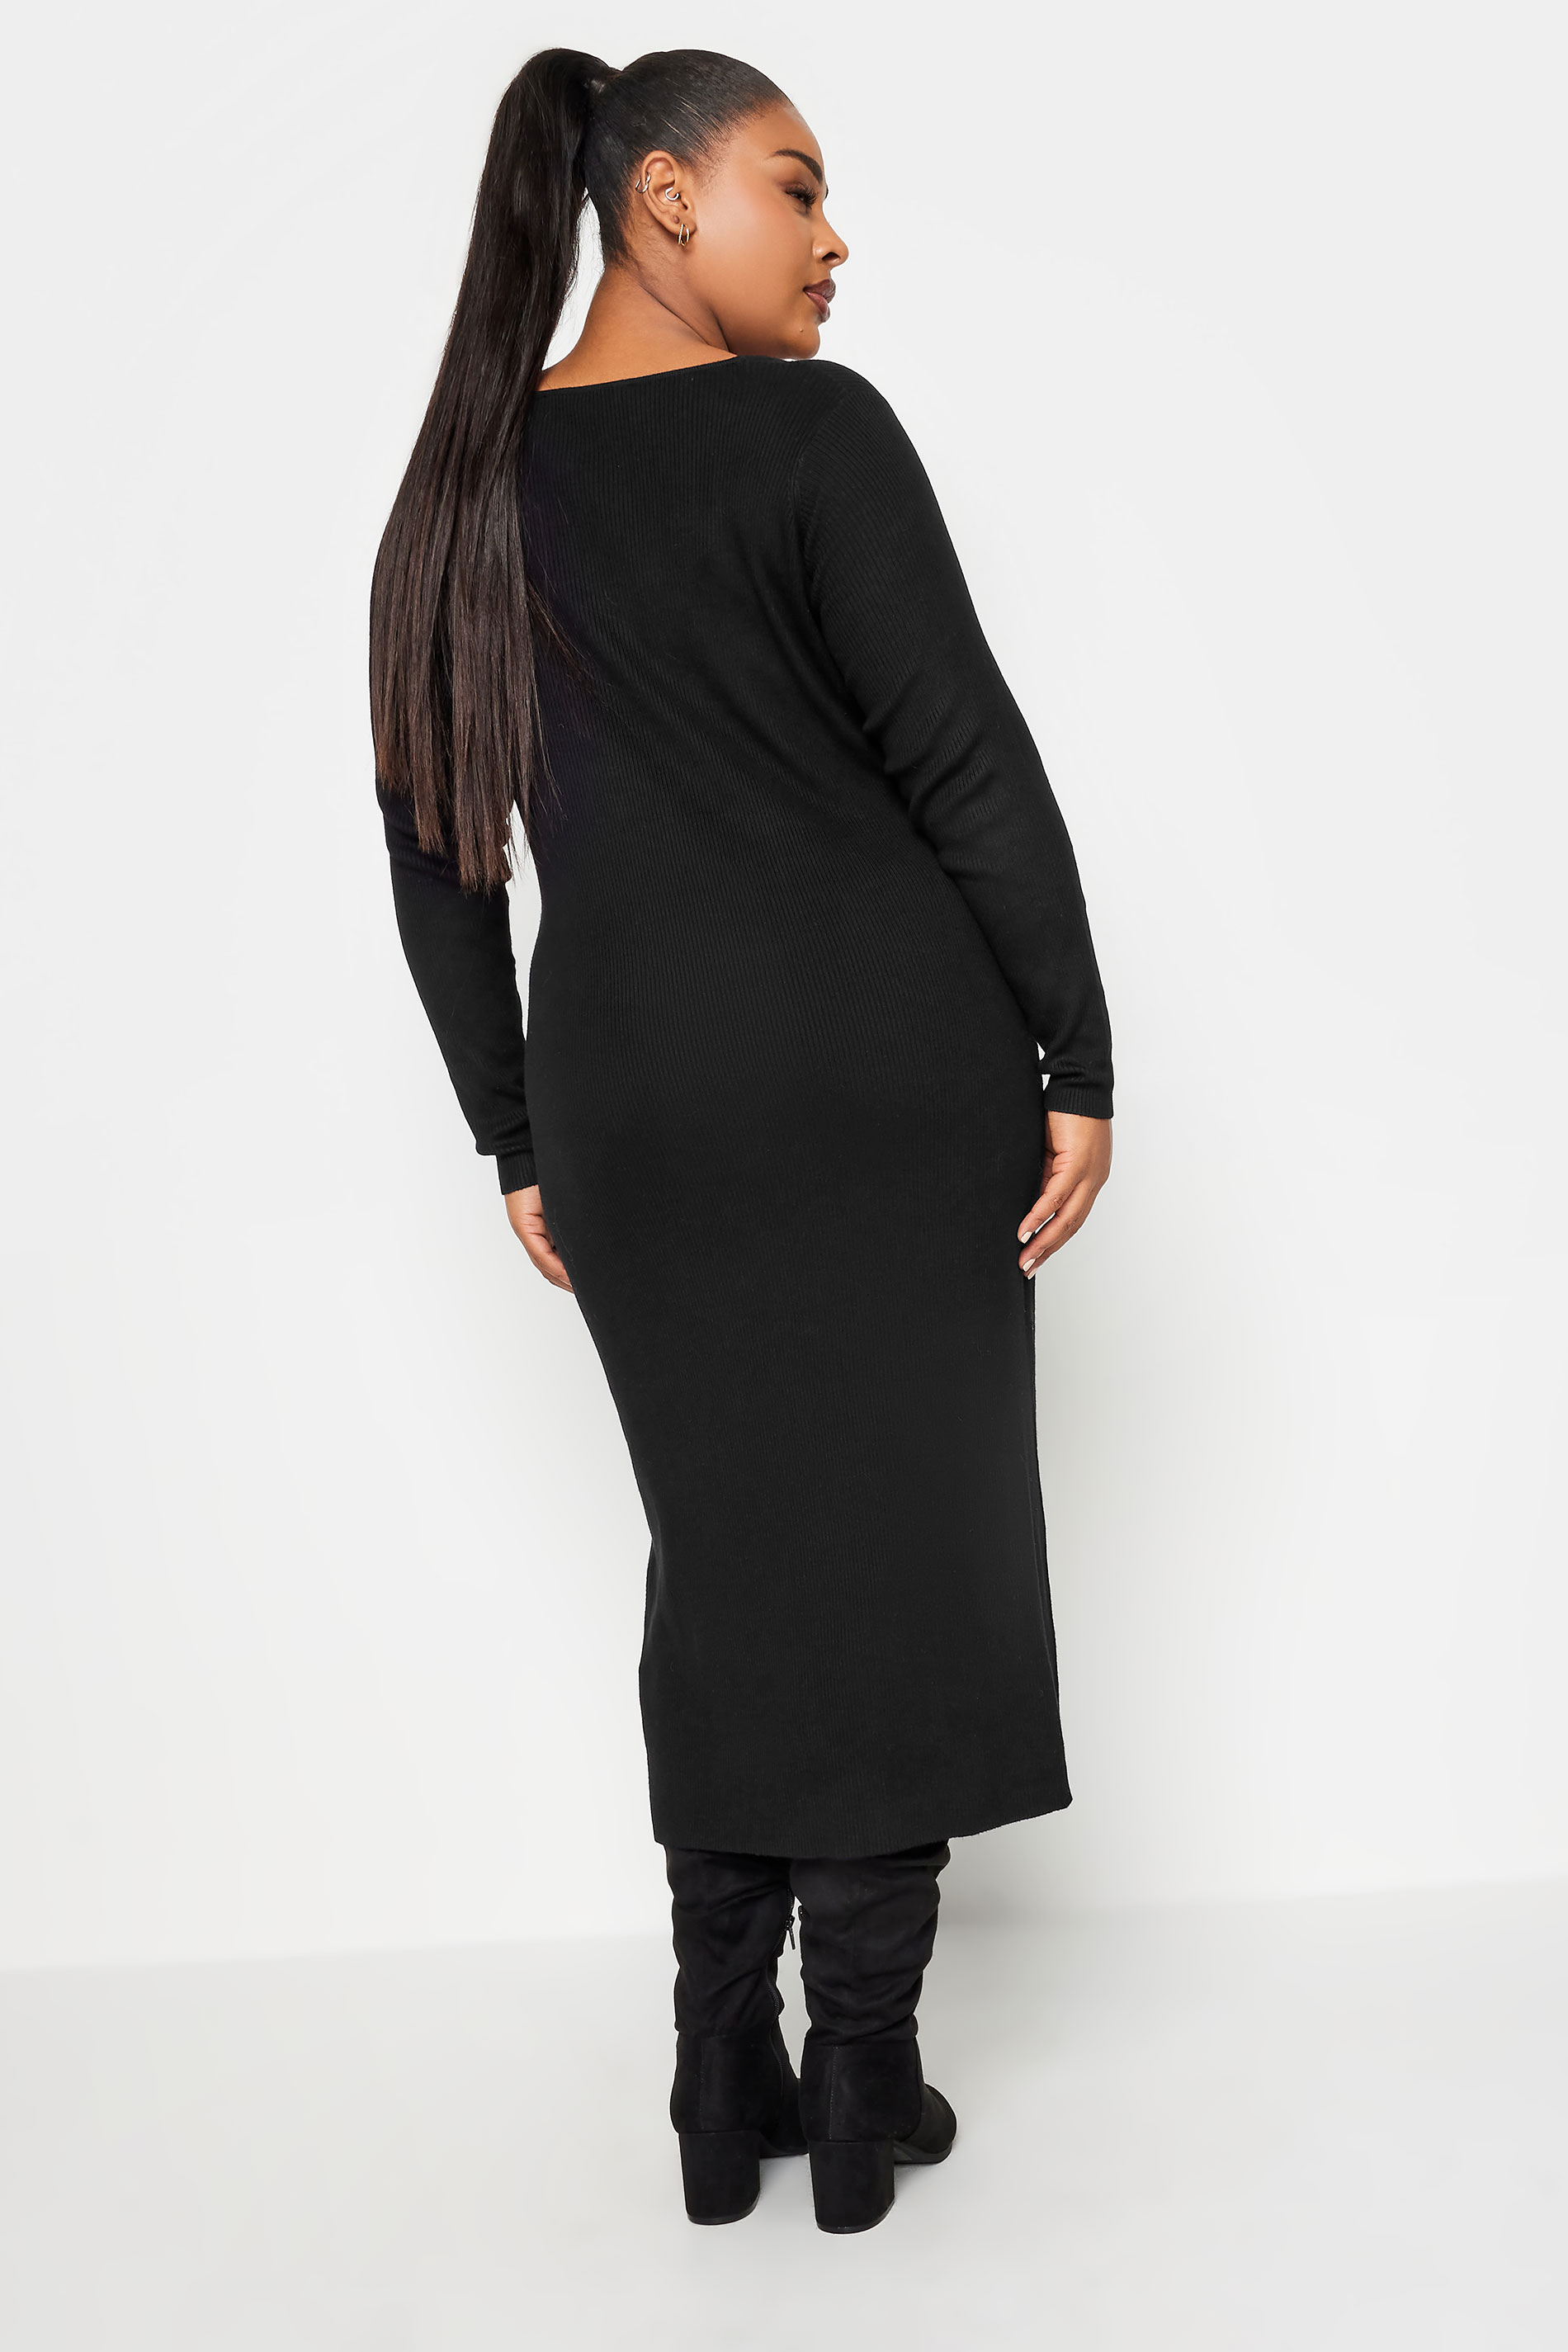 YOURS Plus Size Black Sweetheart Neck Midi Jumper Dress | Yours Clothing 3